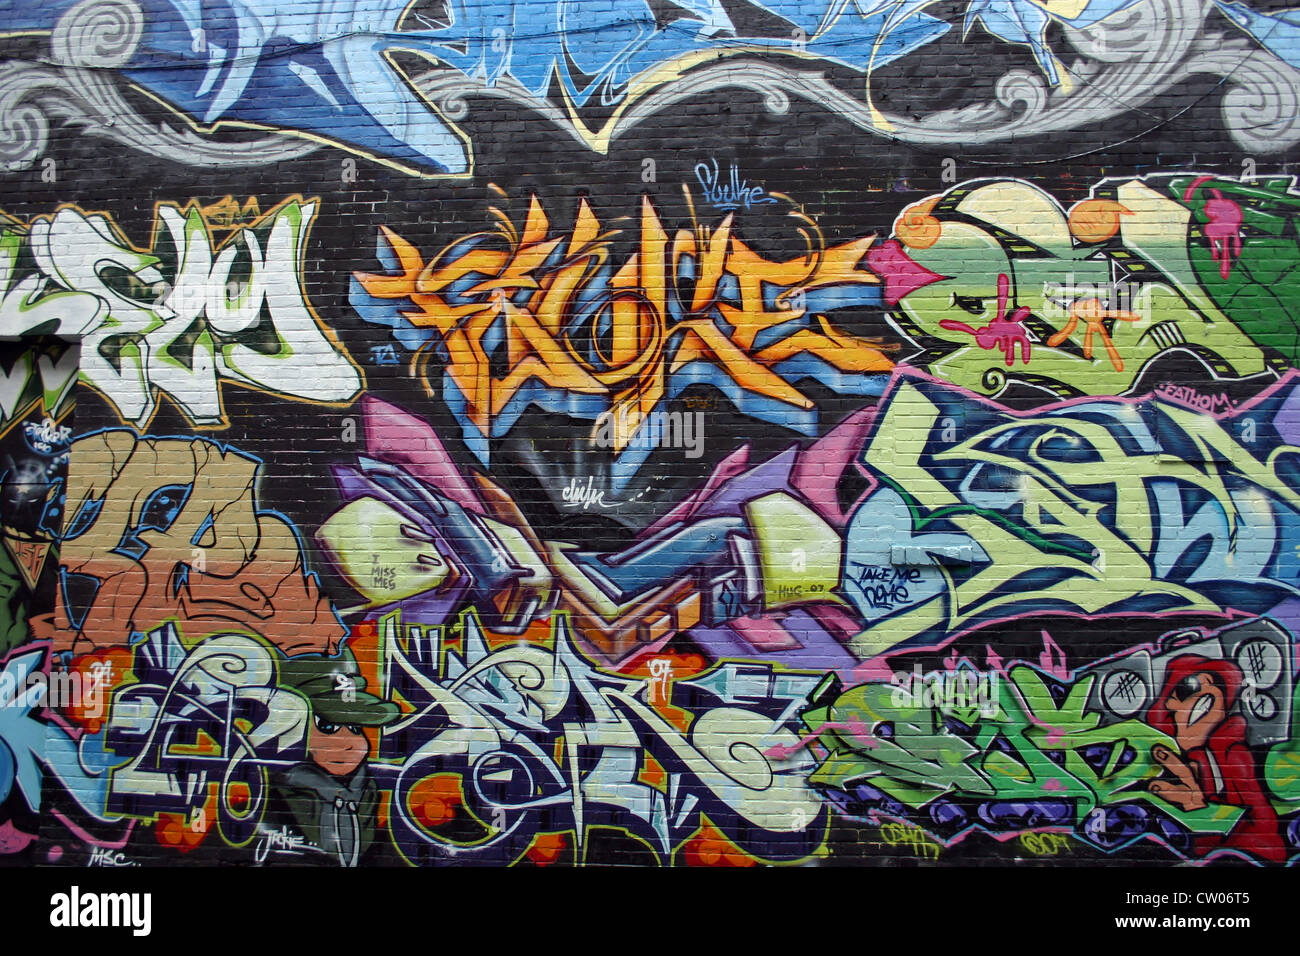 Painted graffiti on a building wall in Montreal, Quebec Stock Photo